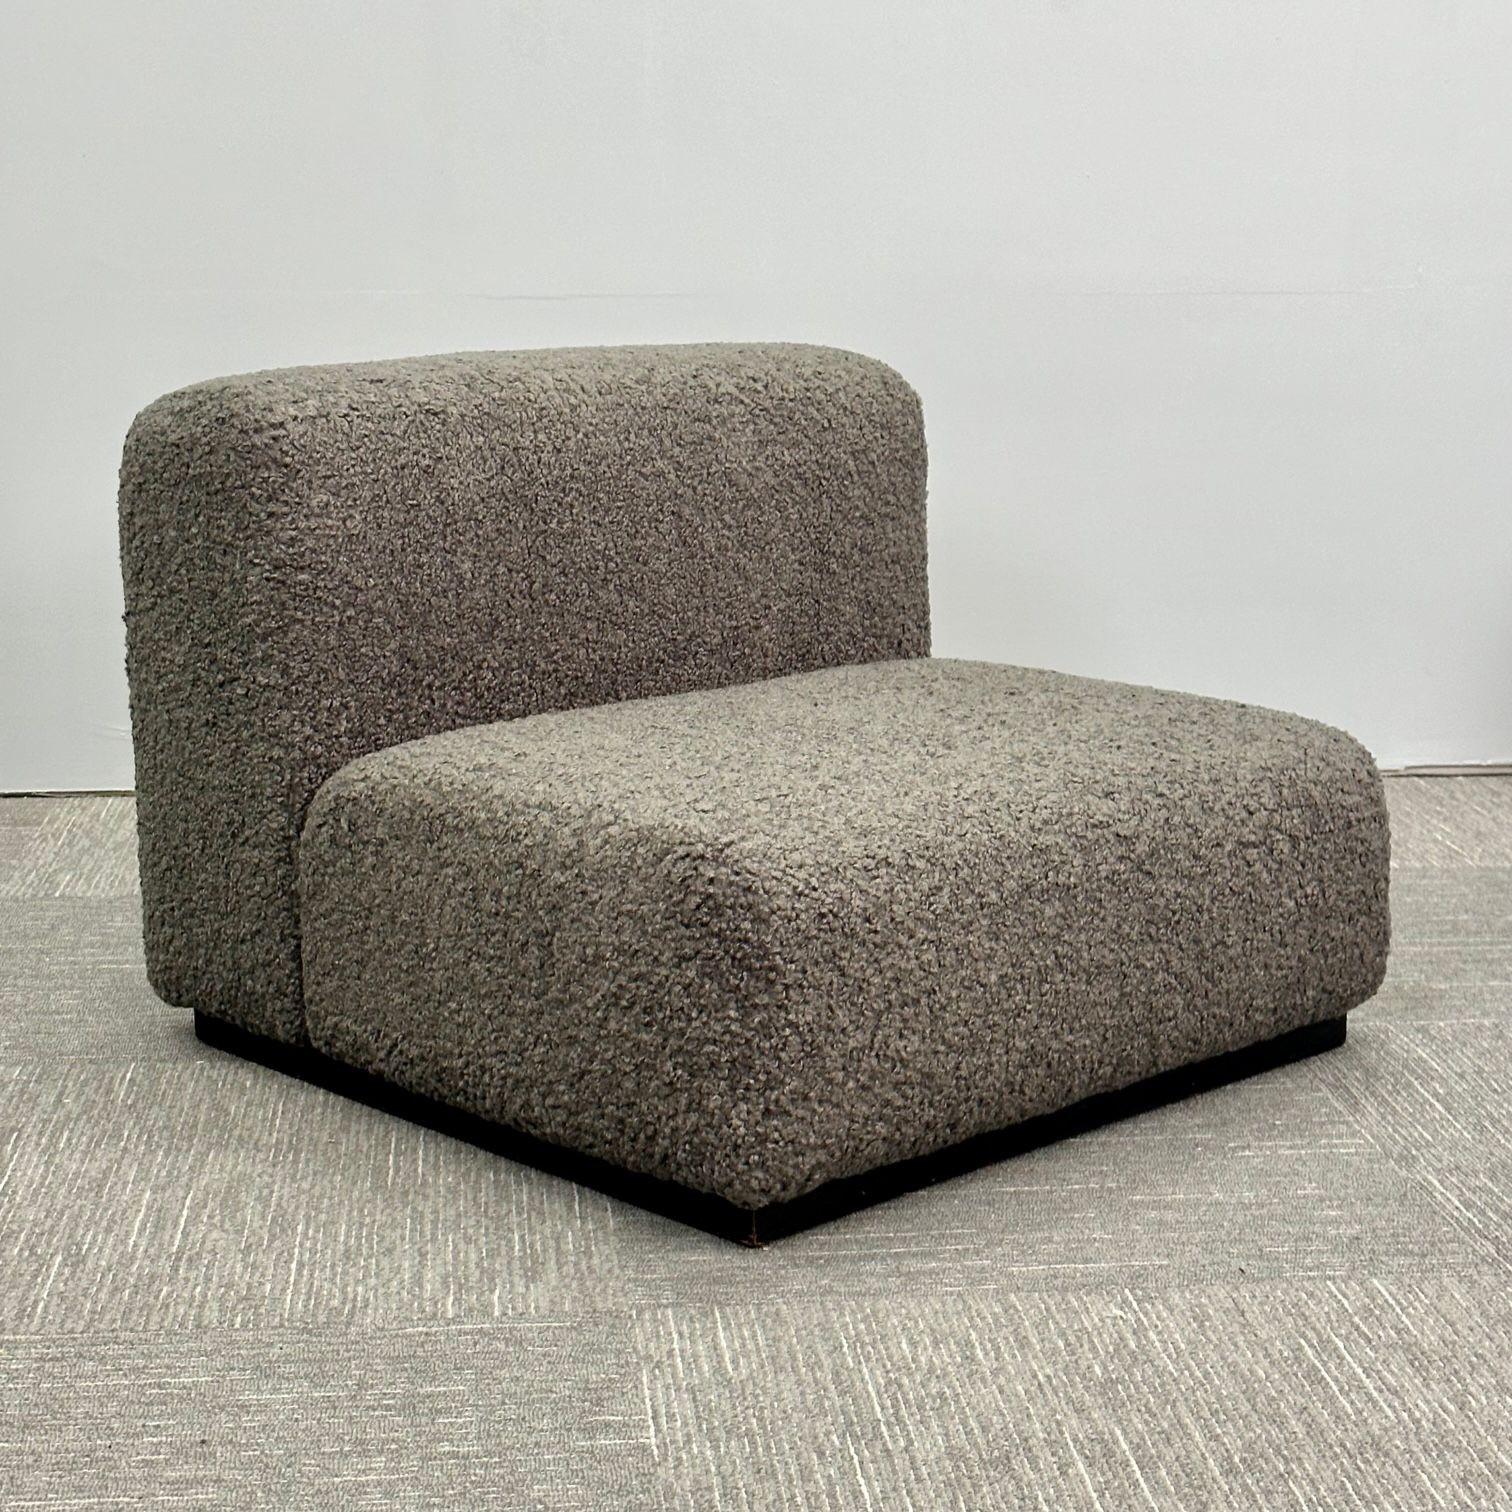 Pair of Mid-Century Modern Stendig Lounge / Slipper Chairs, Gray Bouclé In Good Condition For Sale In Stamford, CT